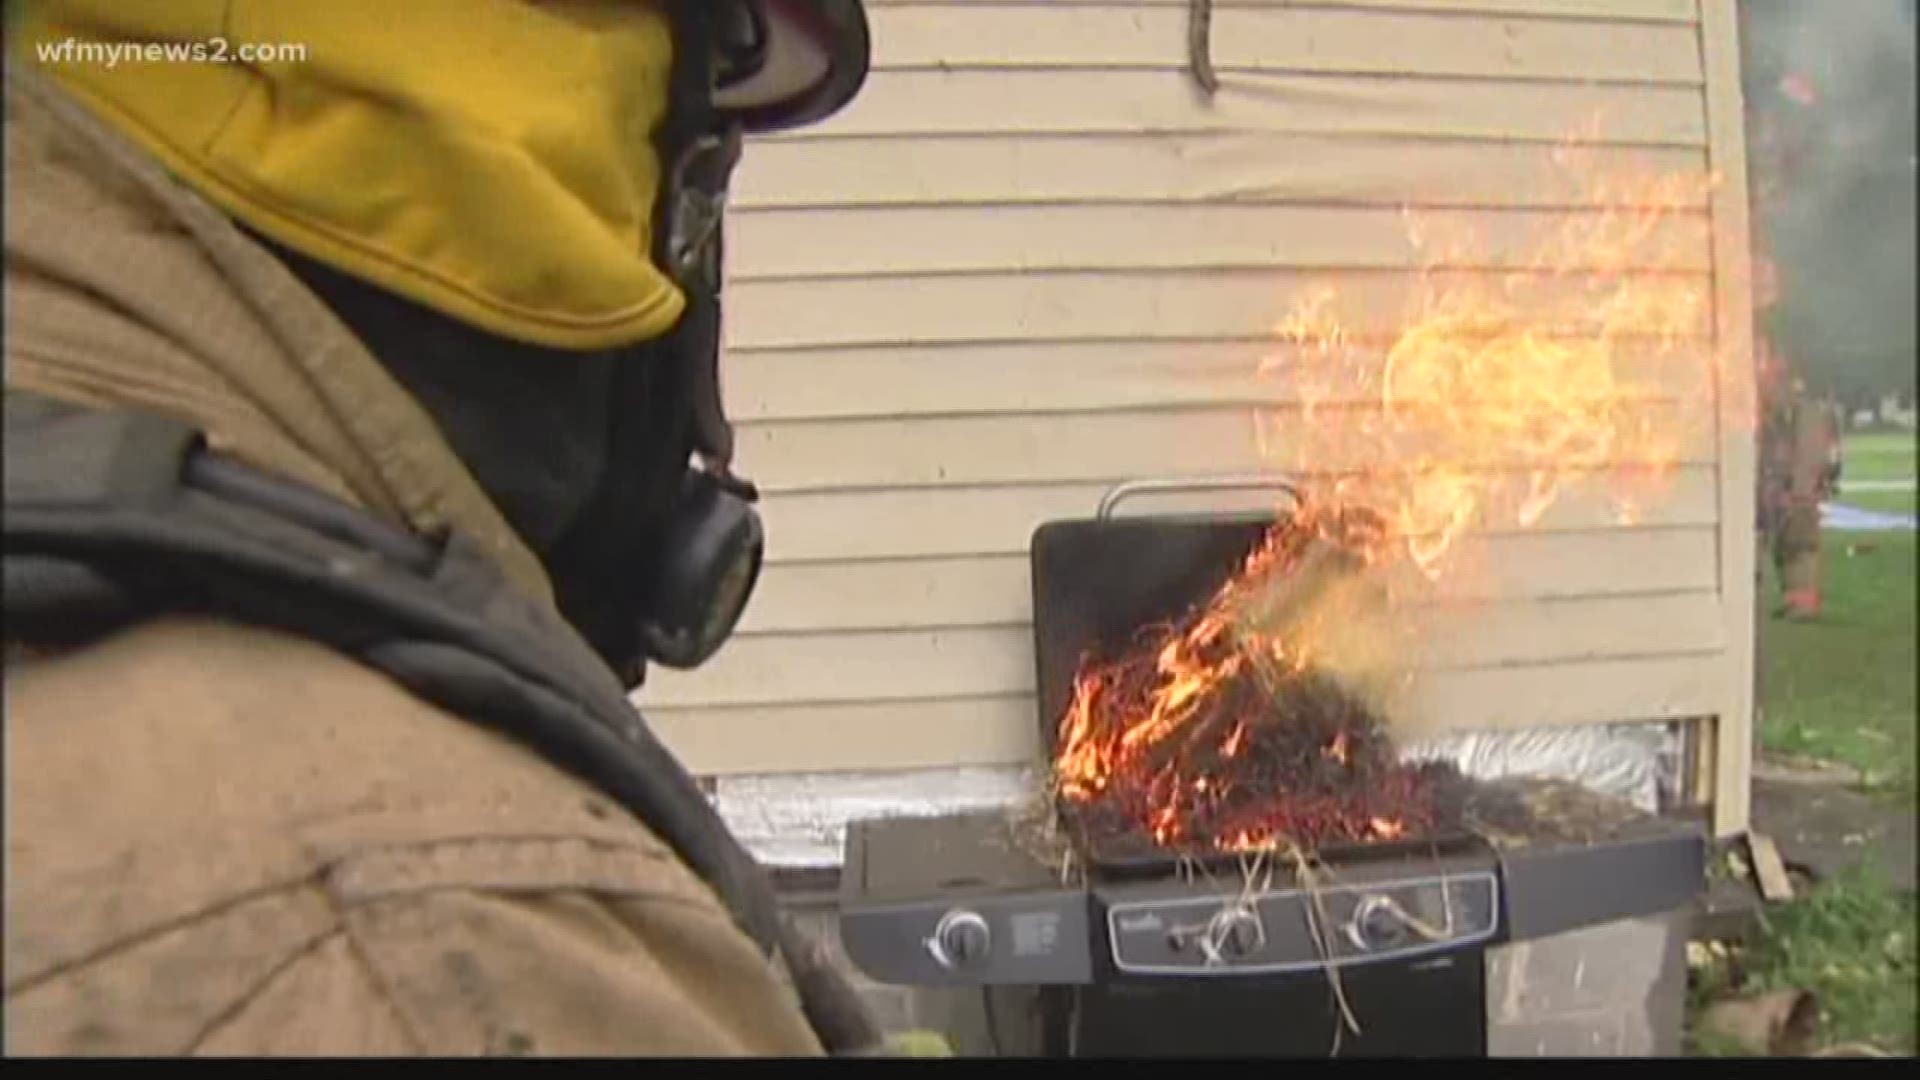 How close is your grill to your house? Firefighters say it needs to be 10 feet. Here's why....